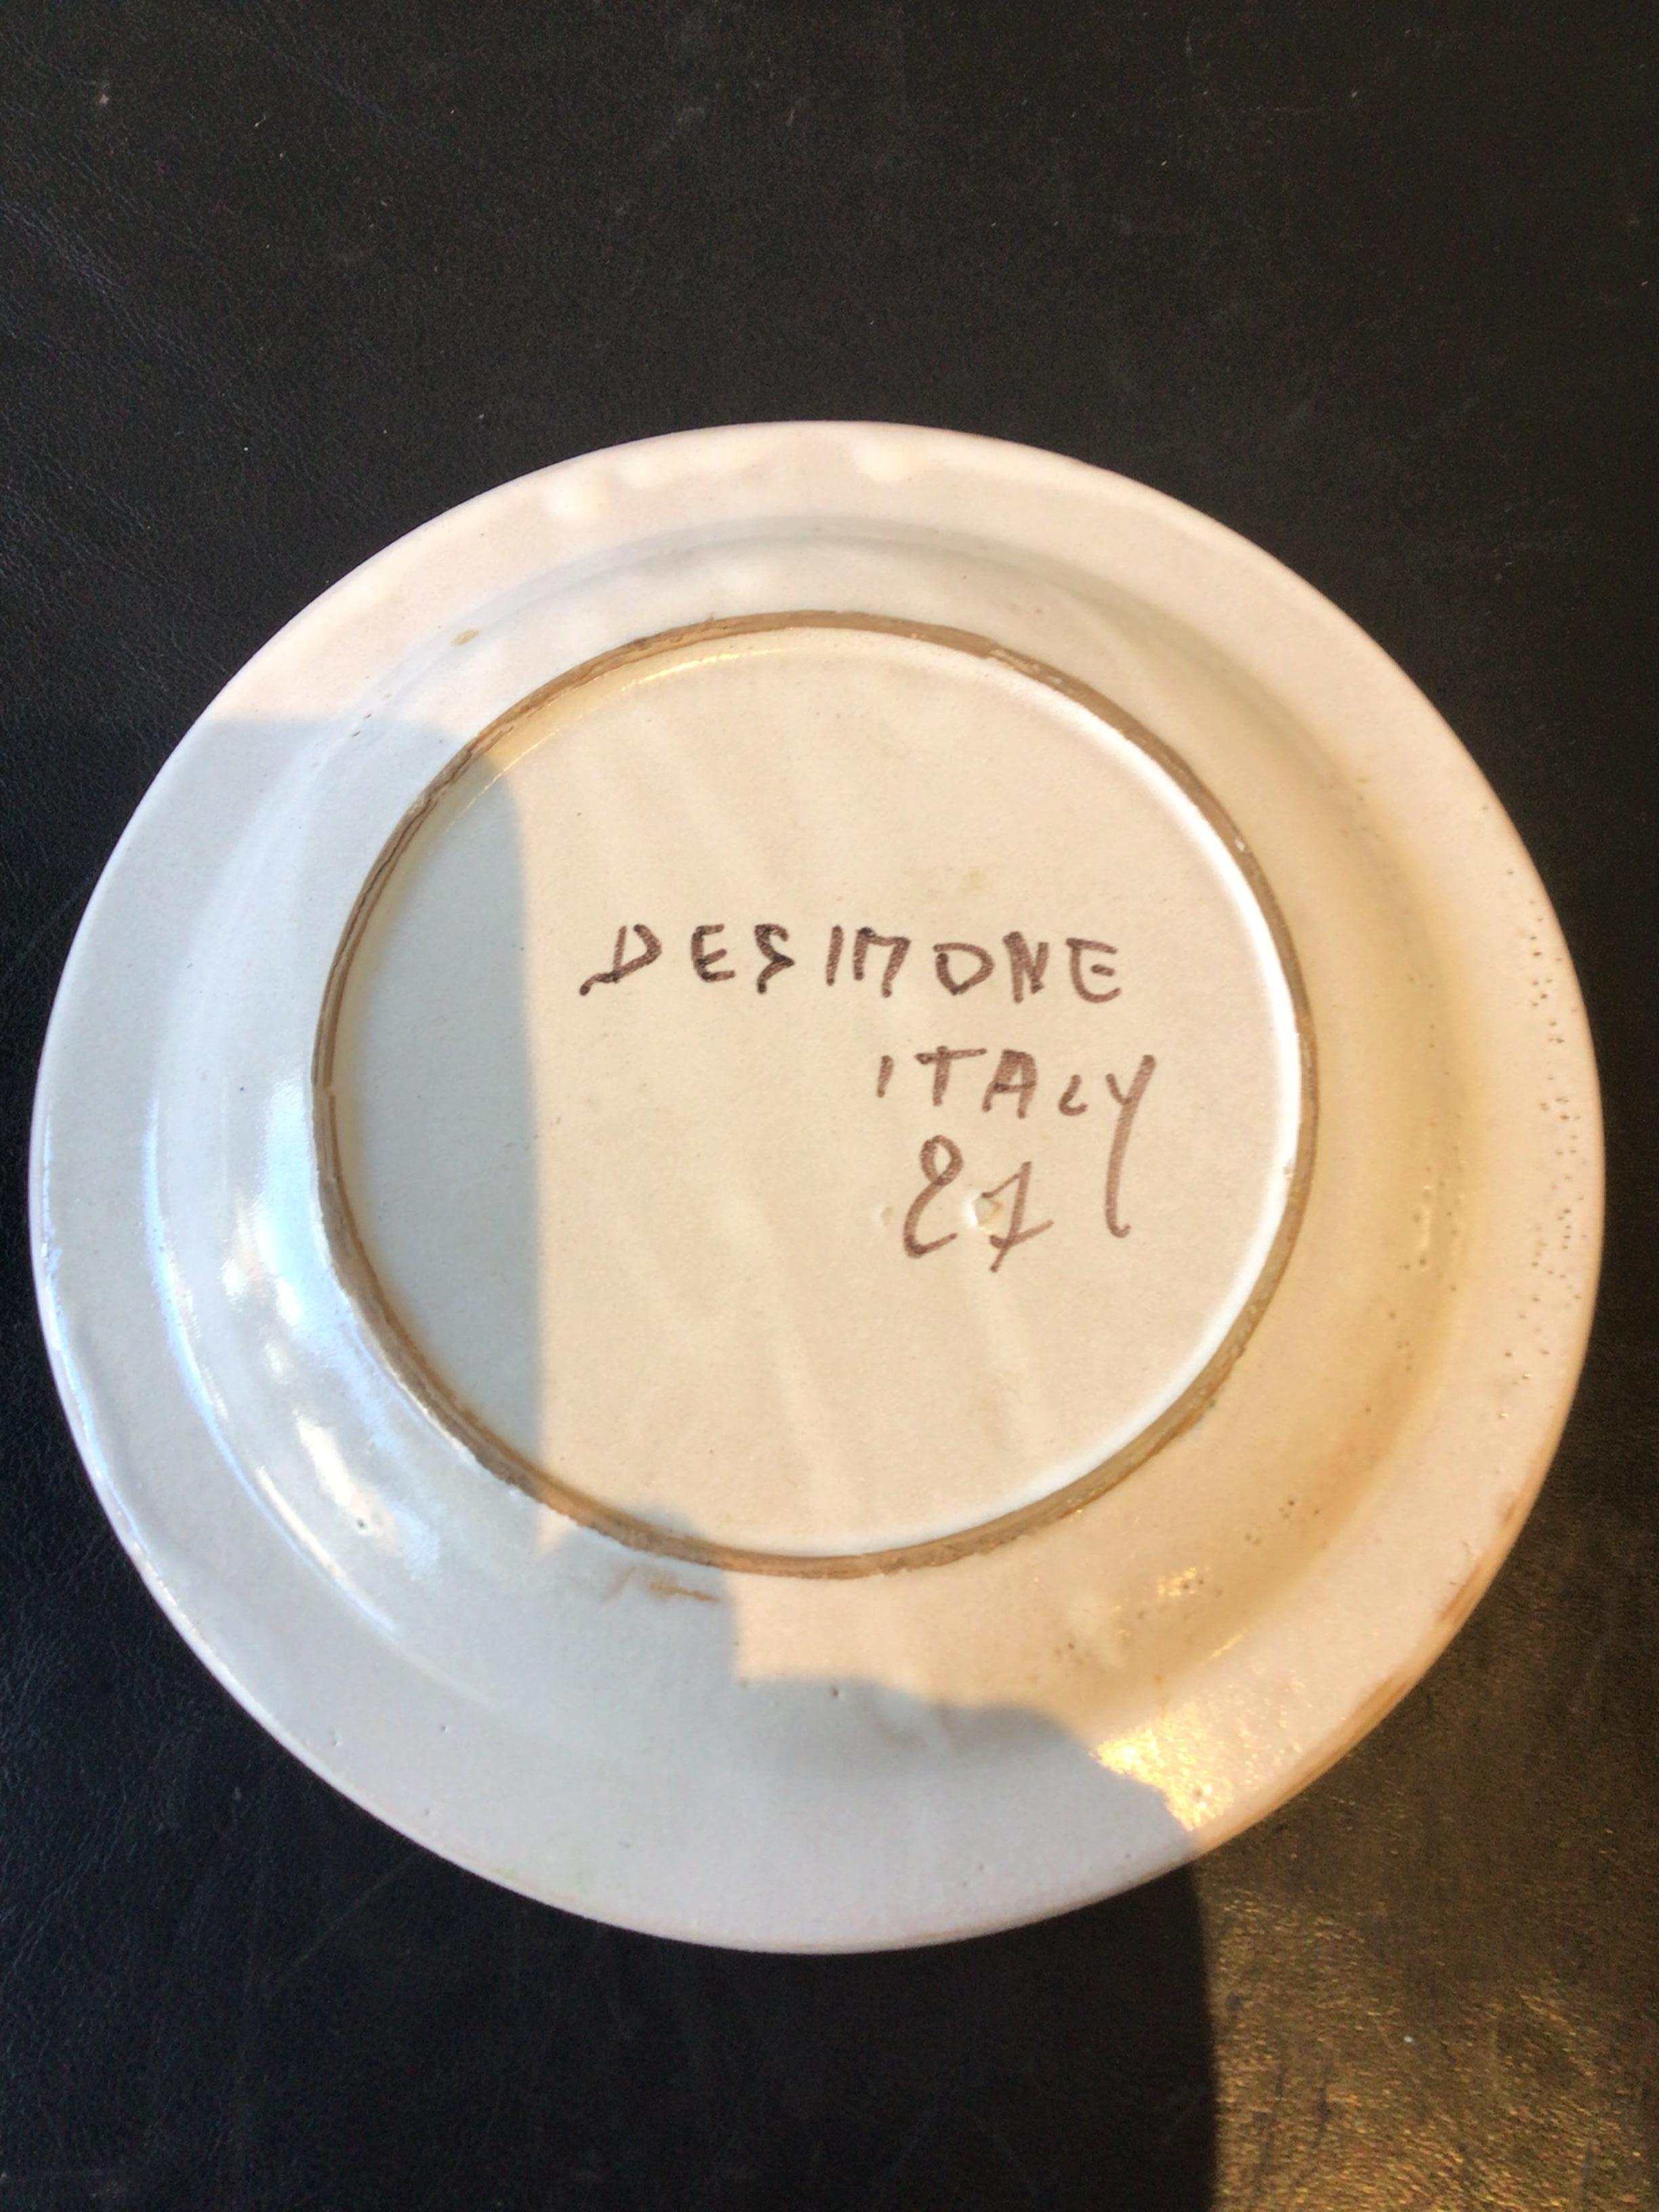 1997 Hand painted plate by DeSimone.